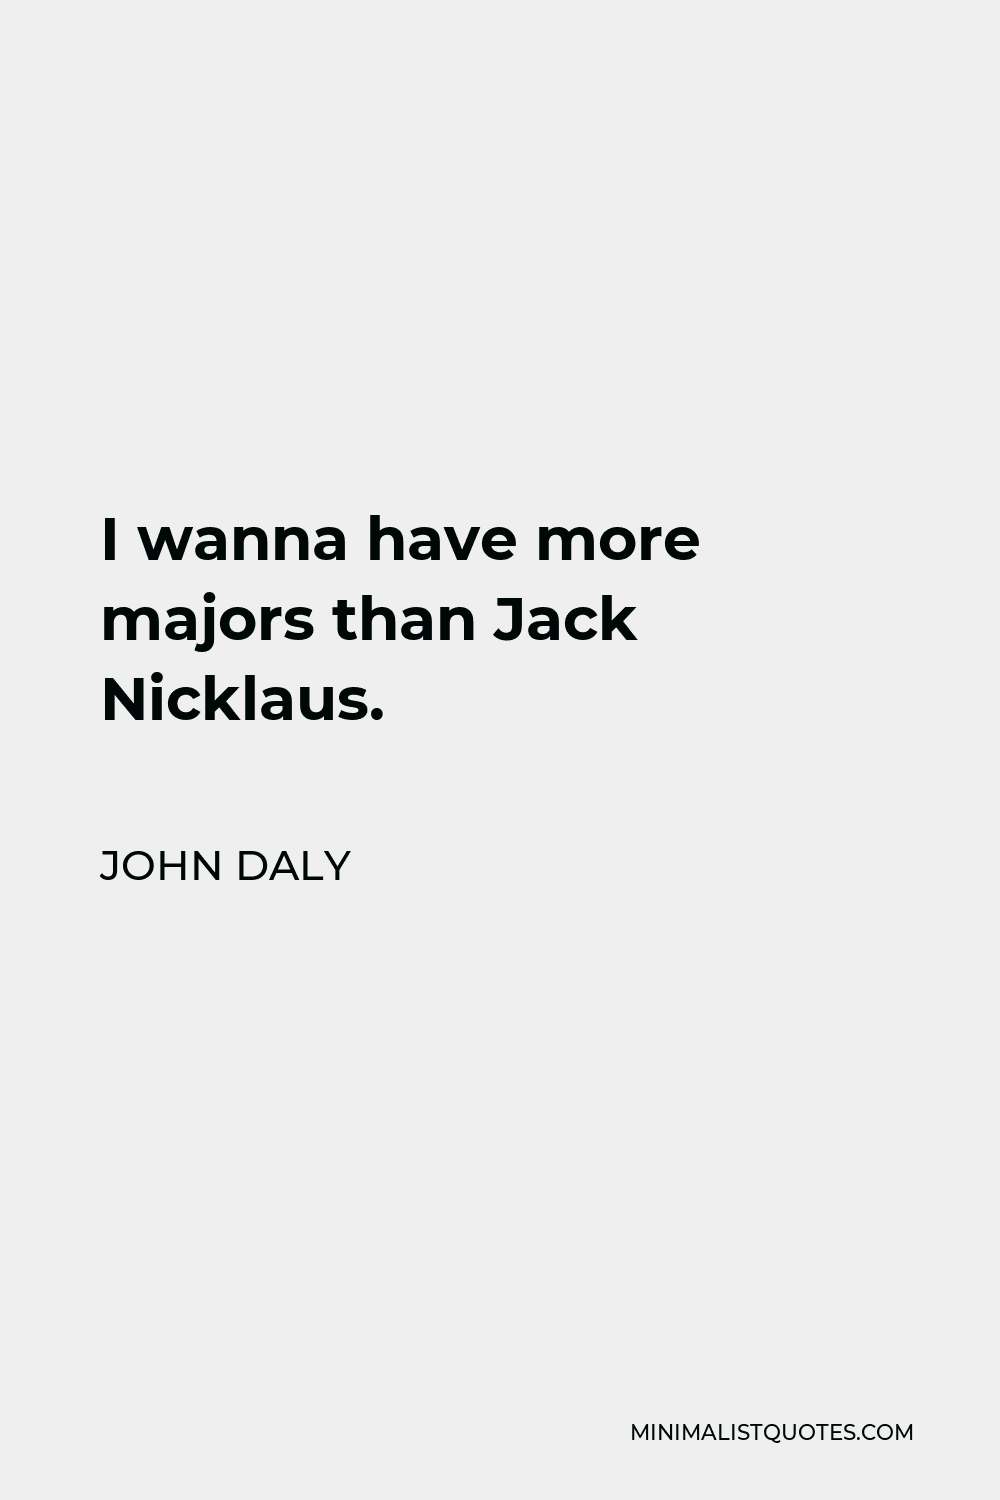 John Daly Quote - I wanna have more majors than Jack Nicklaus.